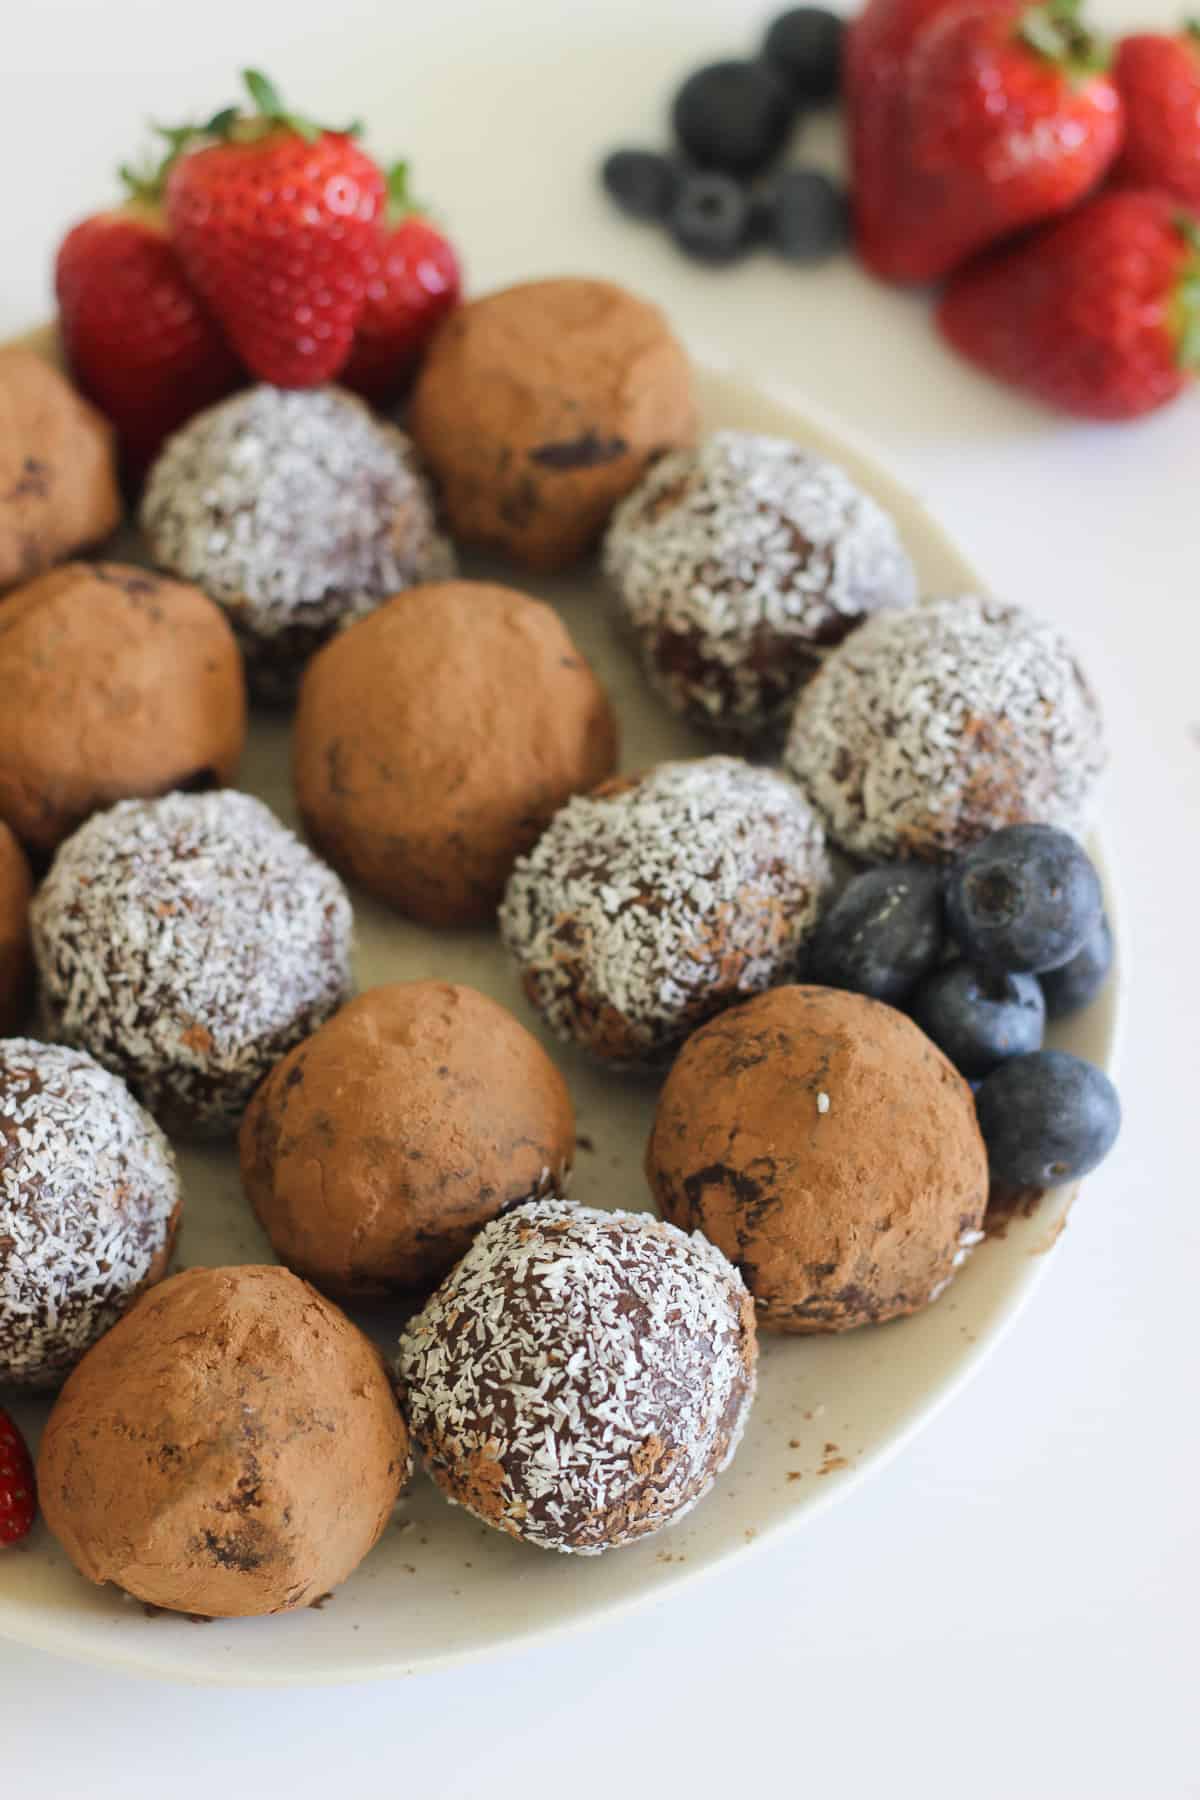 Chocolate truffles on white plate. Strawberries in background